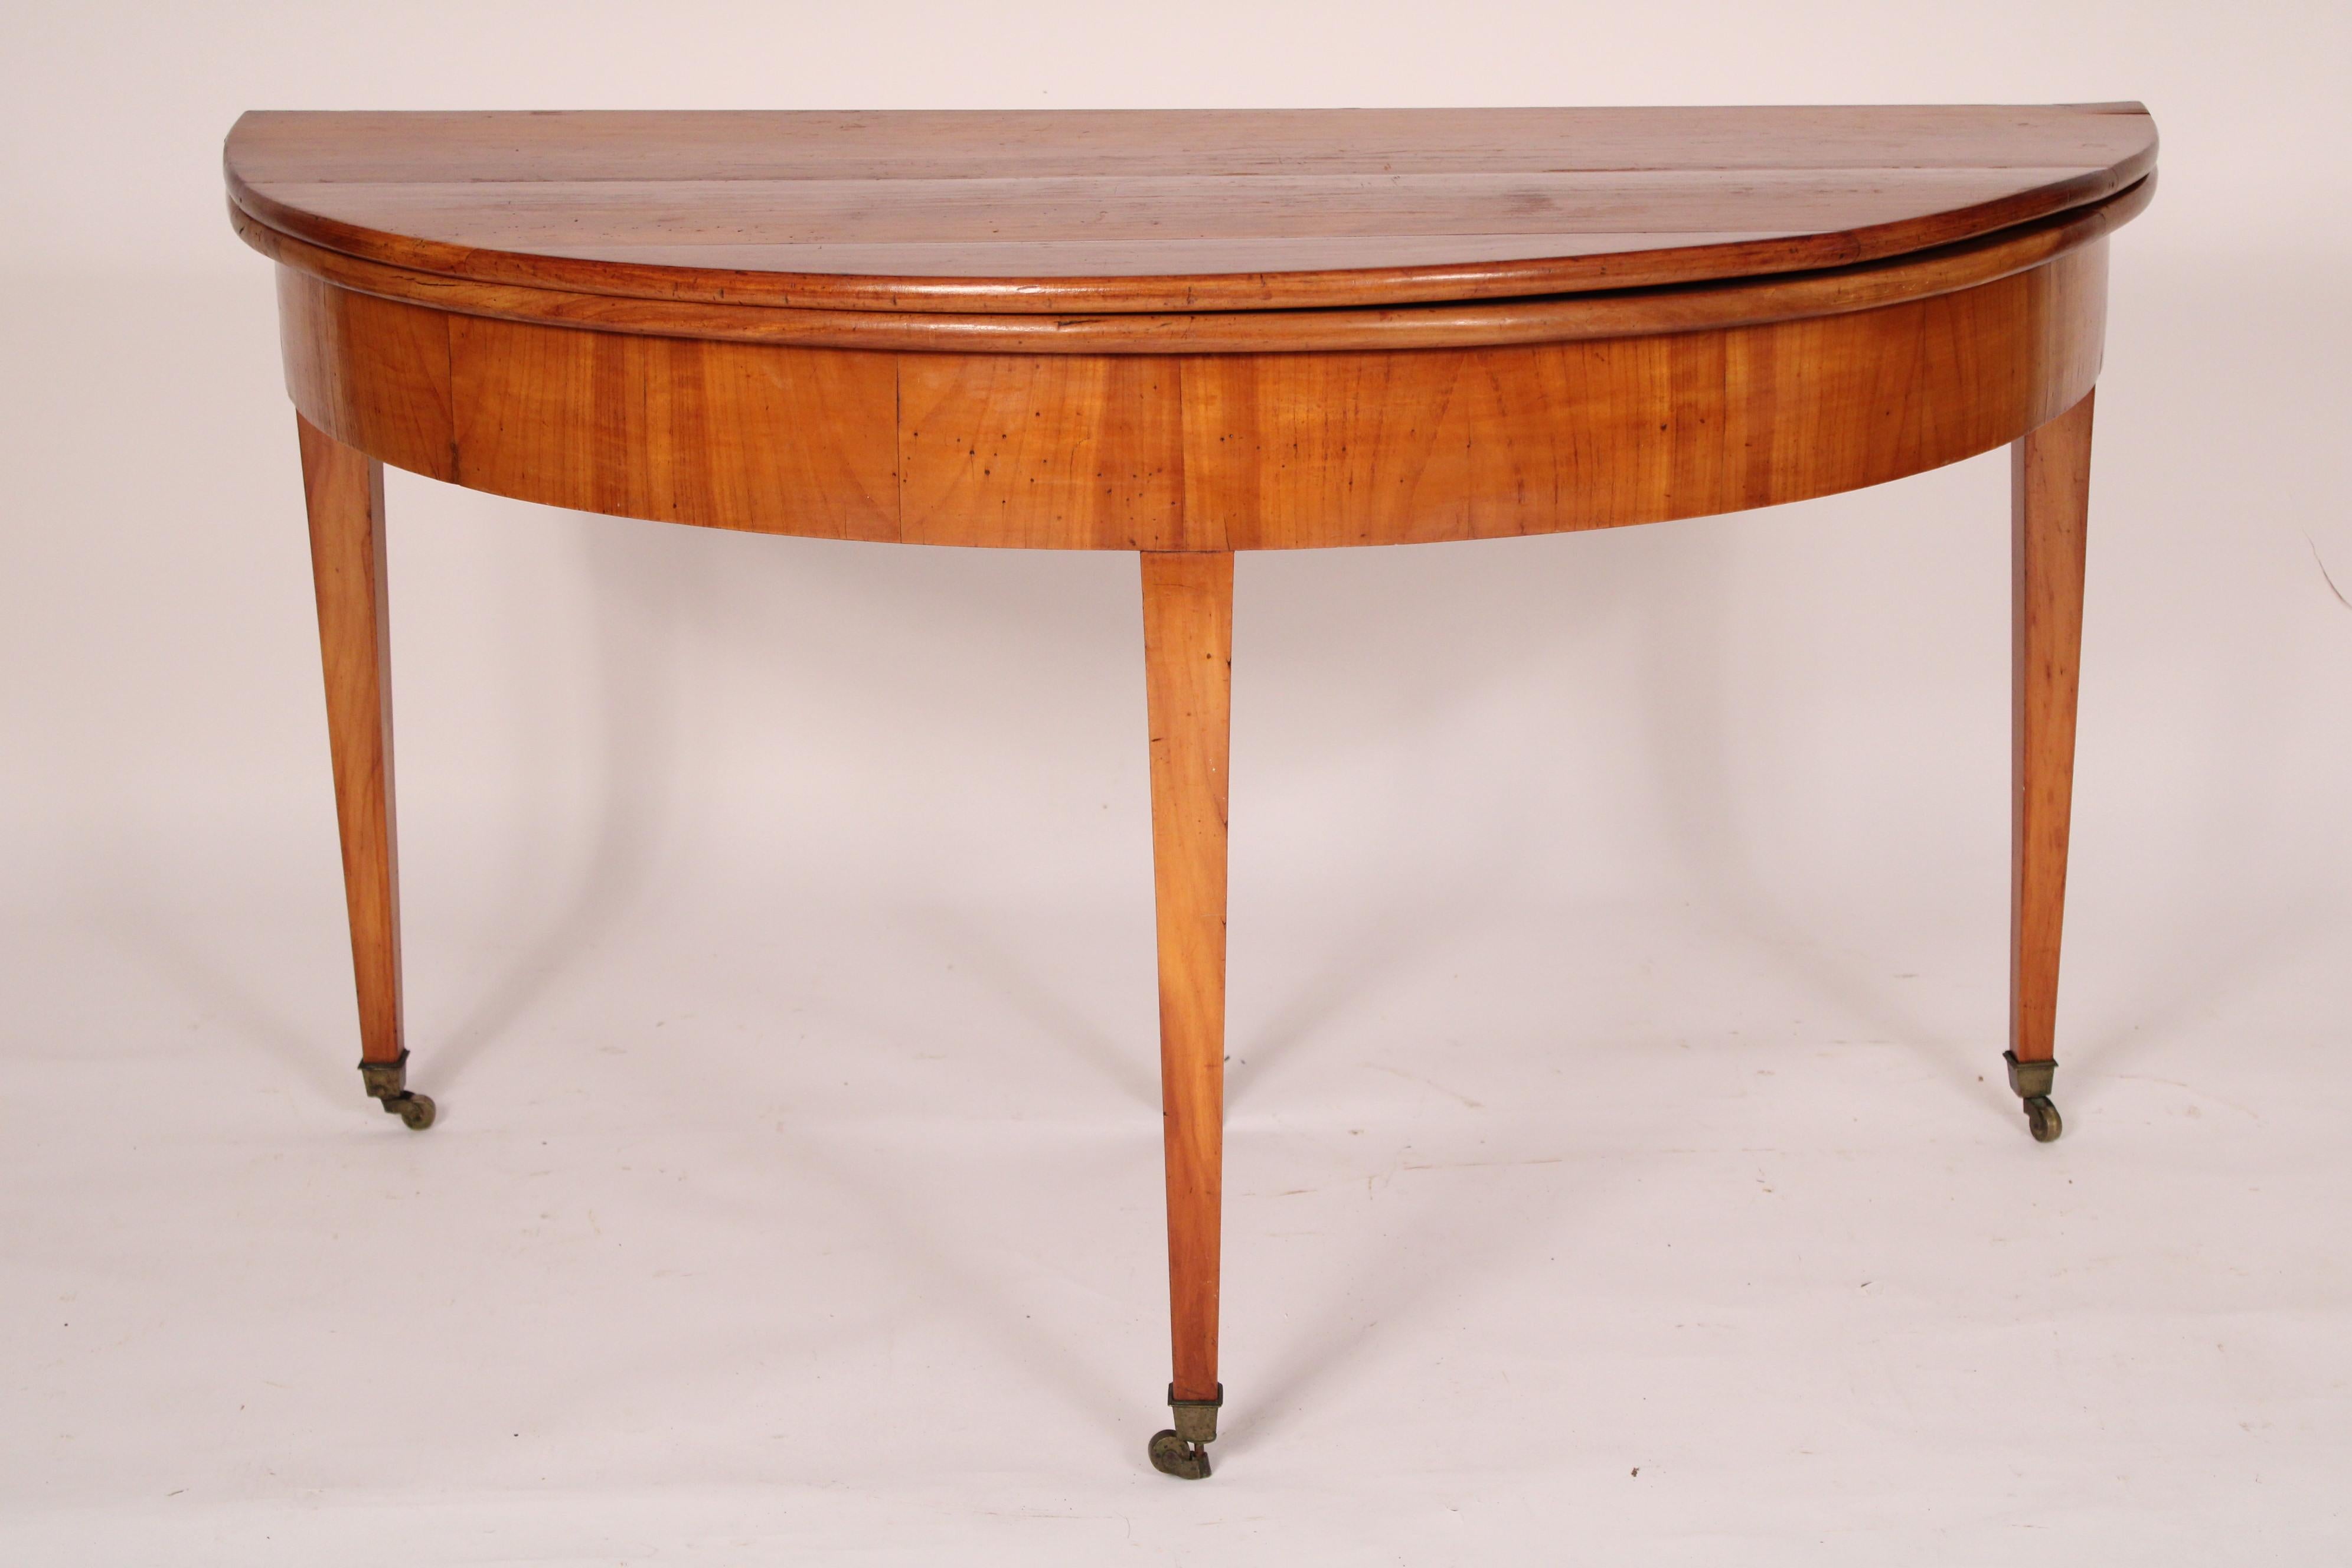 Continental Directoire fruit wood demi lune games table, early 19th century. Having a demi lune top which when opened becomes a round top, a fruit wood frieze, resting on square tapered legs ending in brass casters.  Knee clearance 23.25